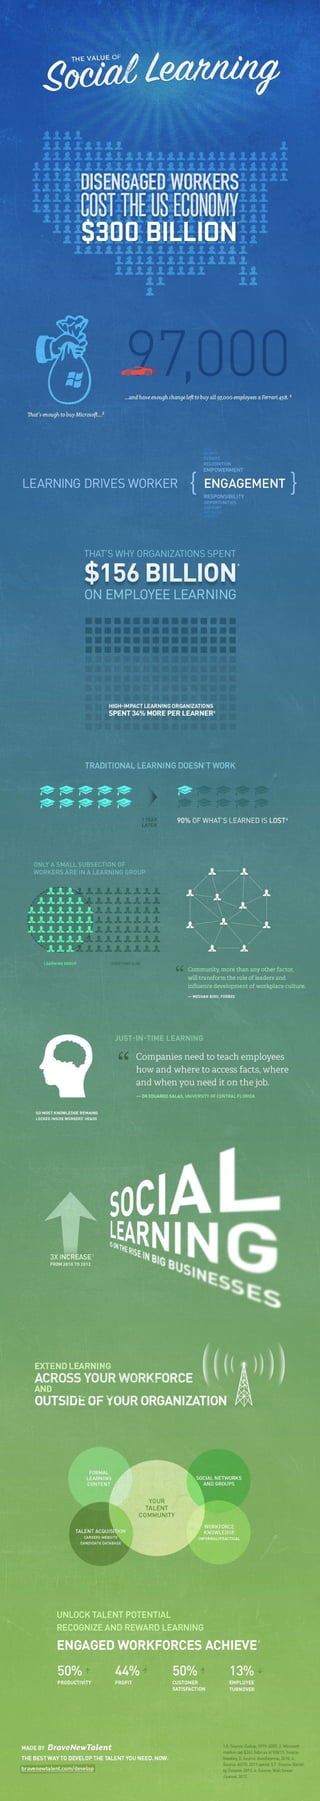 Social Learning Infographic